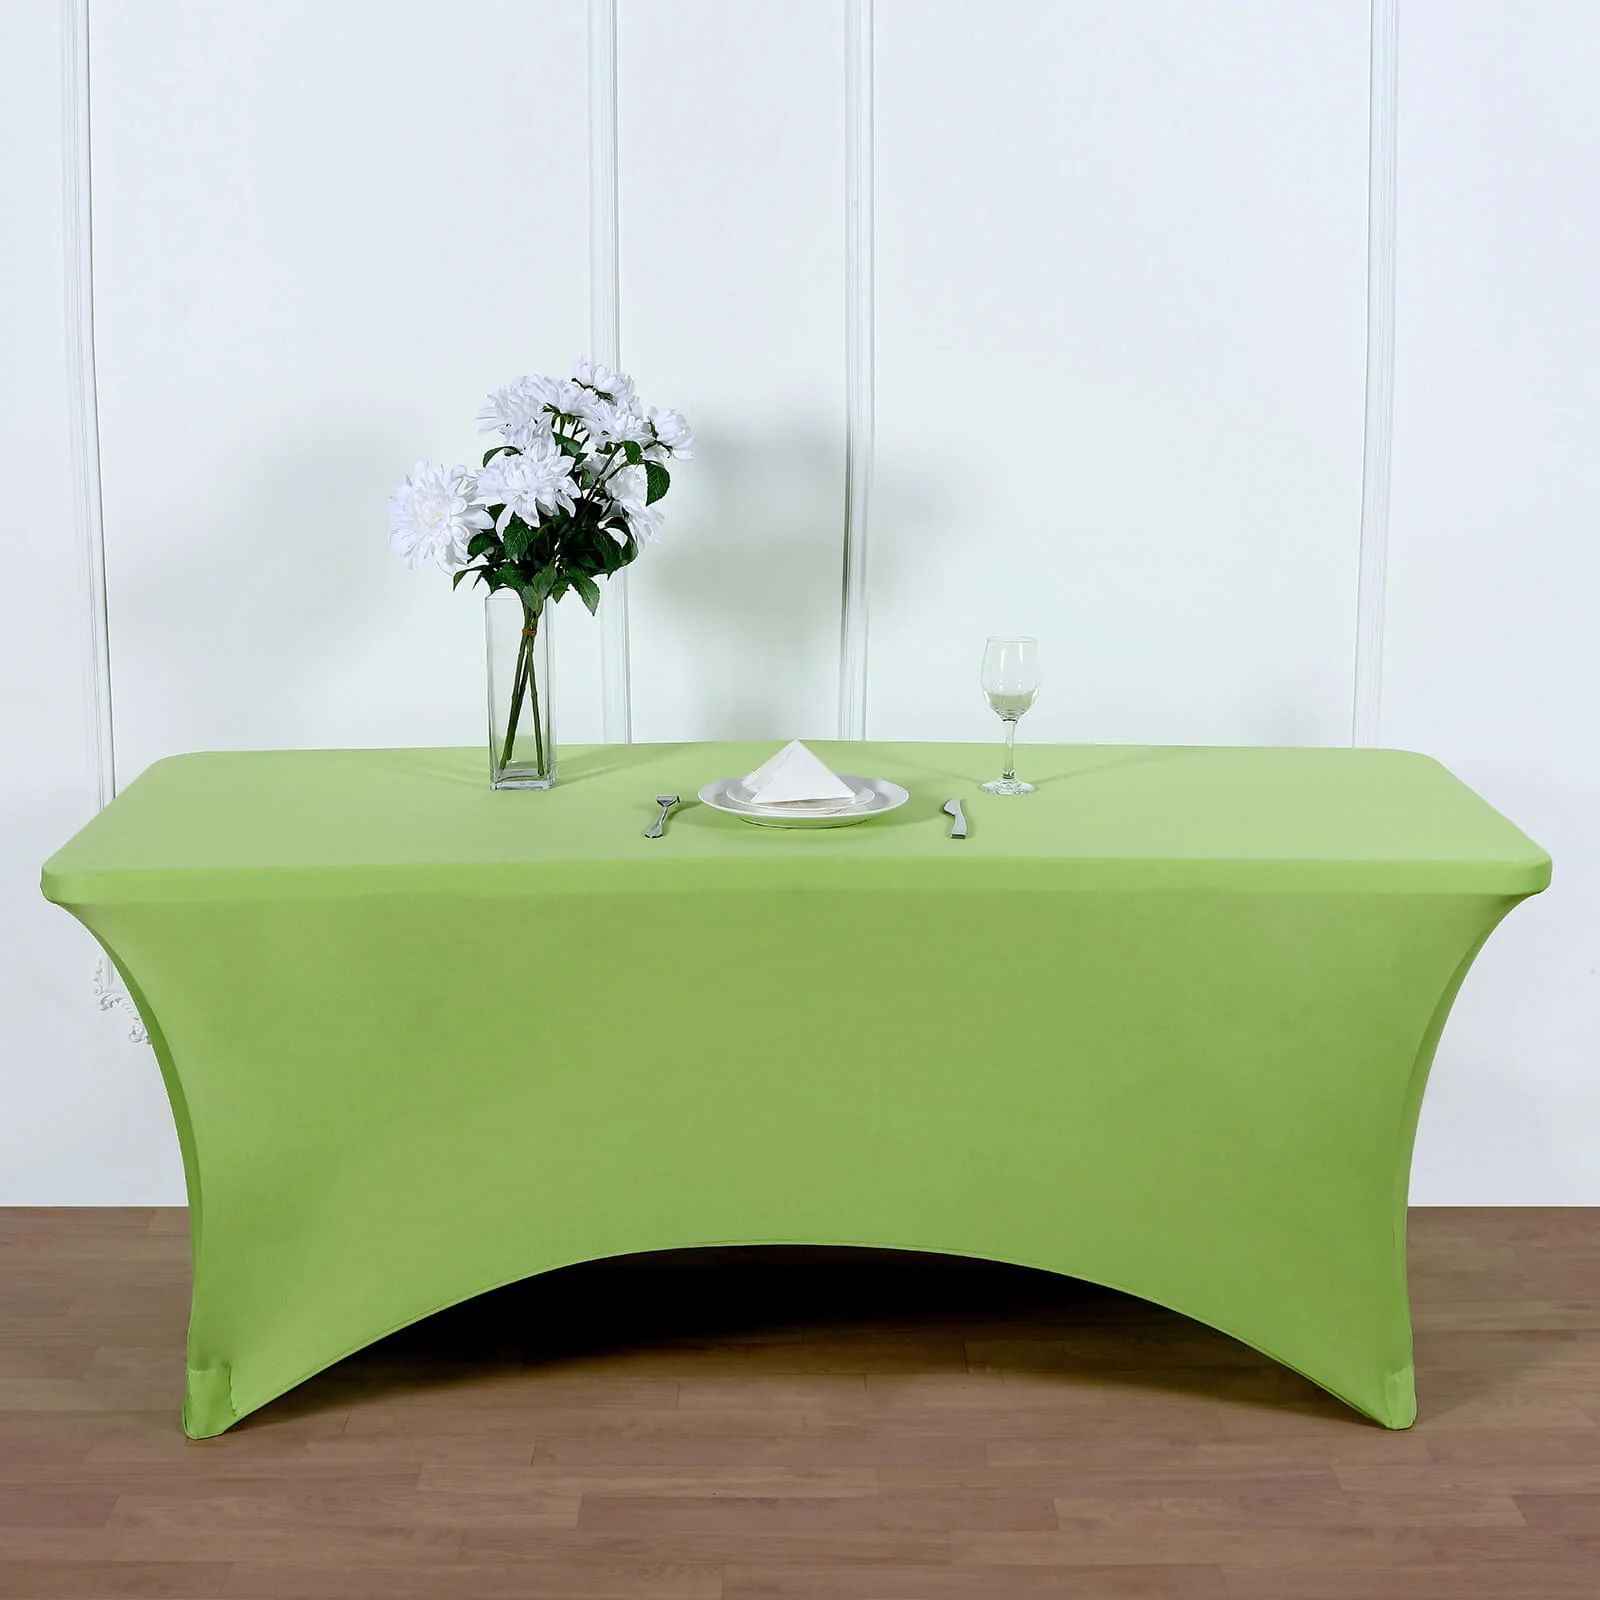 Apple Green - 6 Ft Rectangular Spandex Table Cover Wedding Party - £26.56 GBP